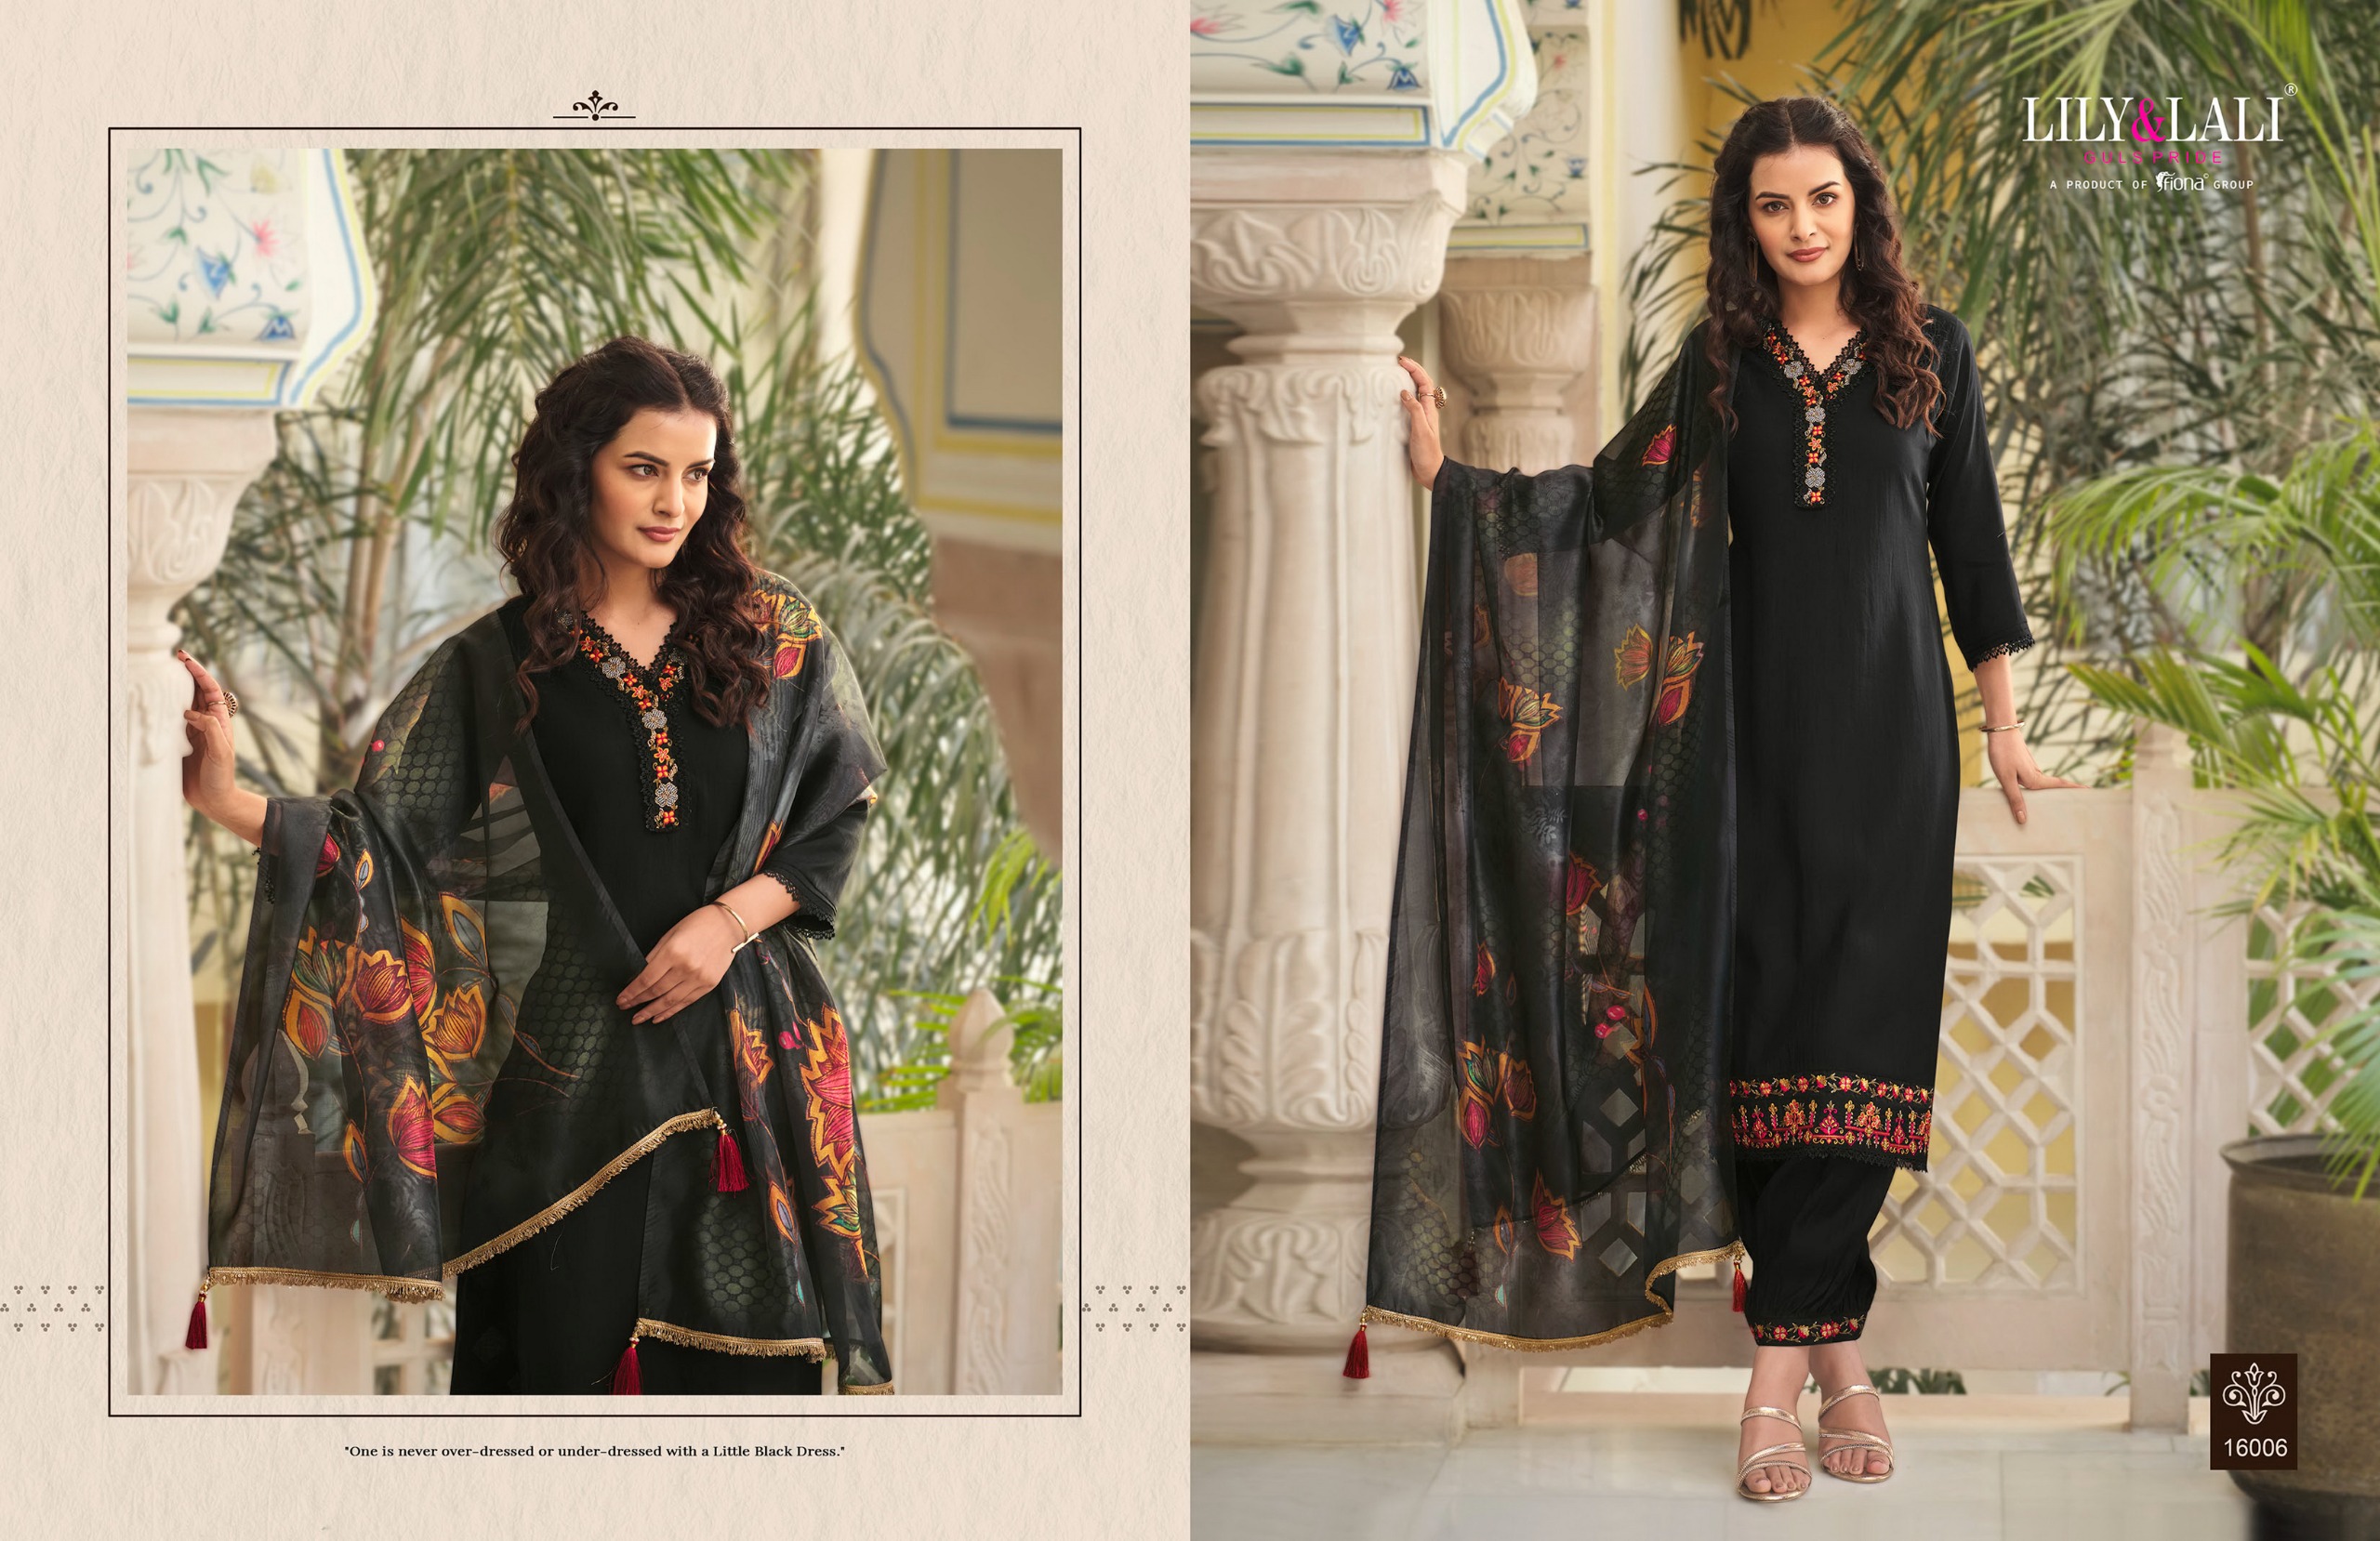 Lily And Lali Afghani Vol 2 collection 7